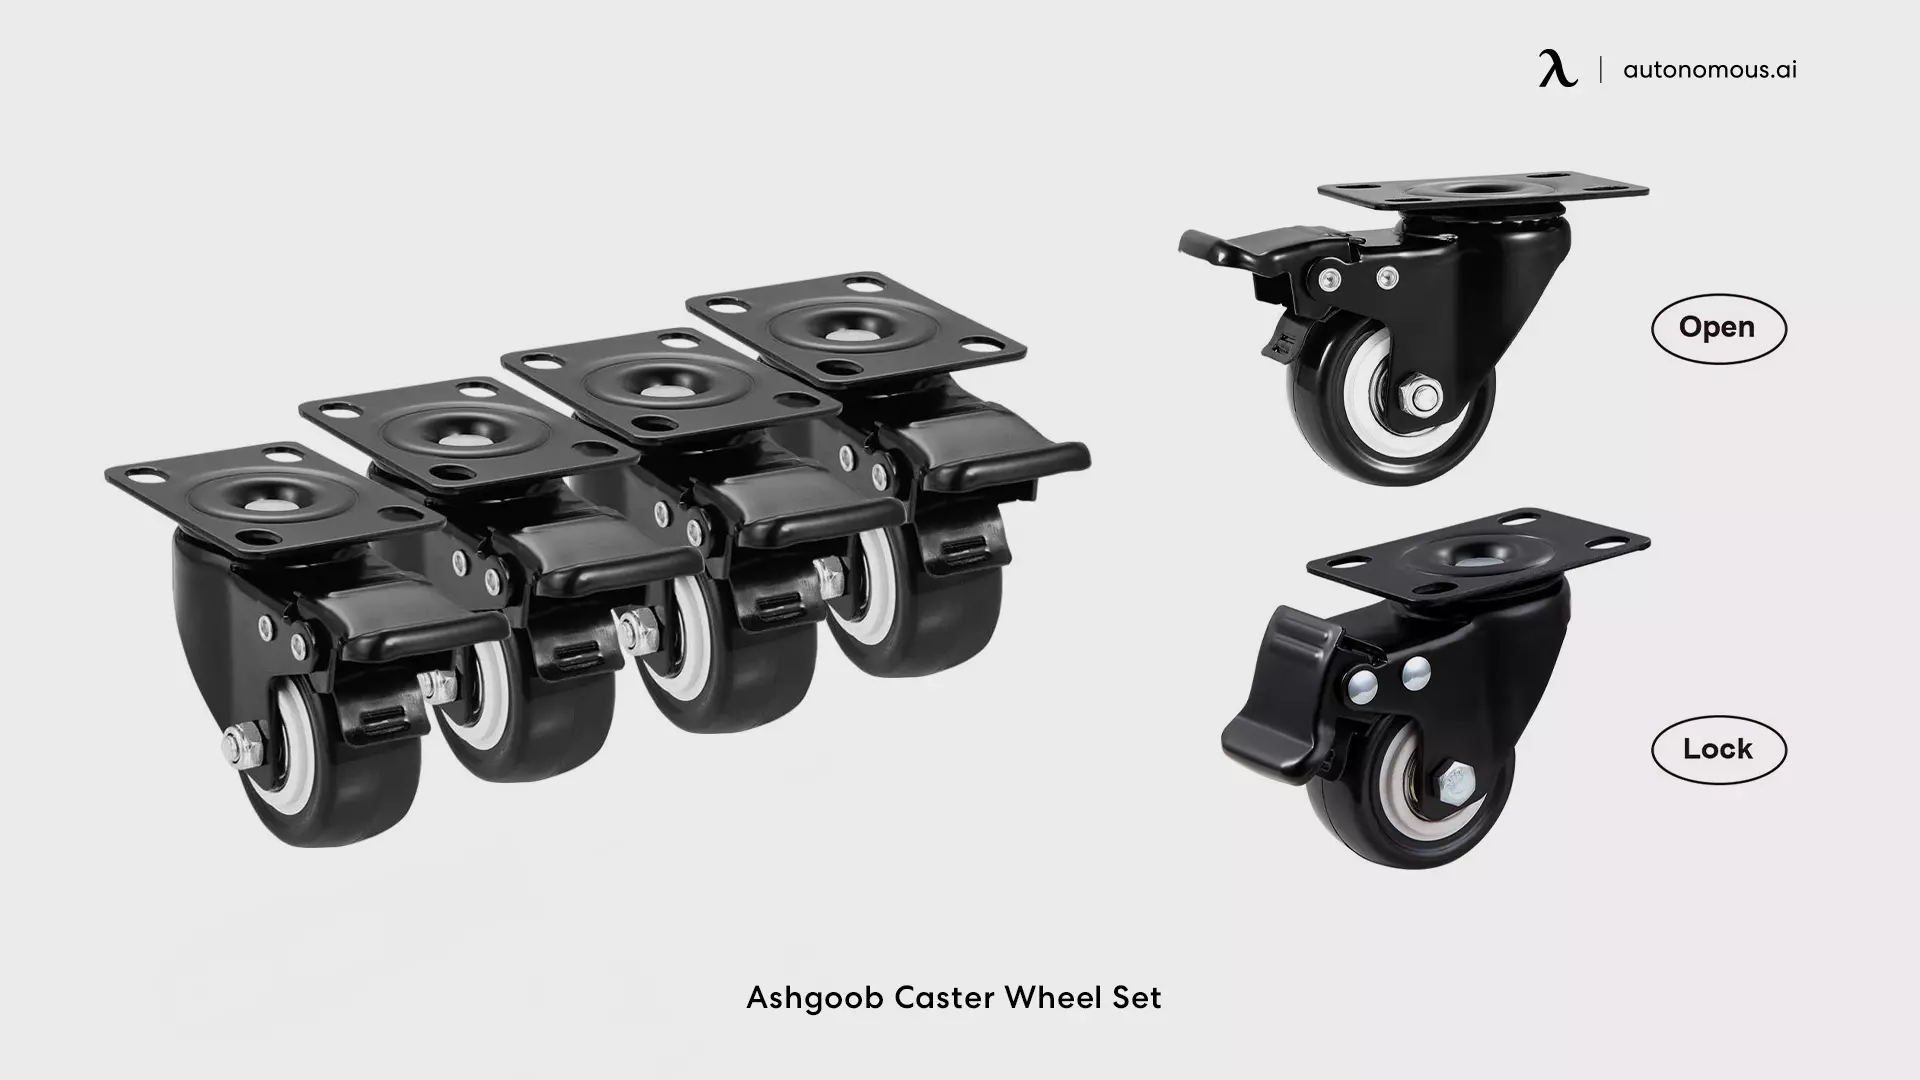 Ashgoob Caster Wheel Set office chair casters